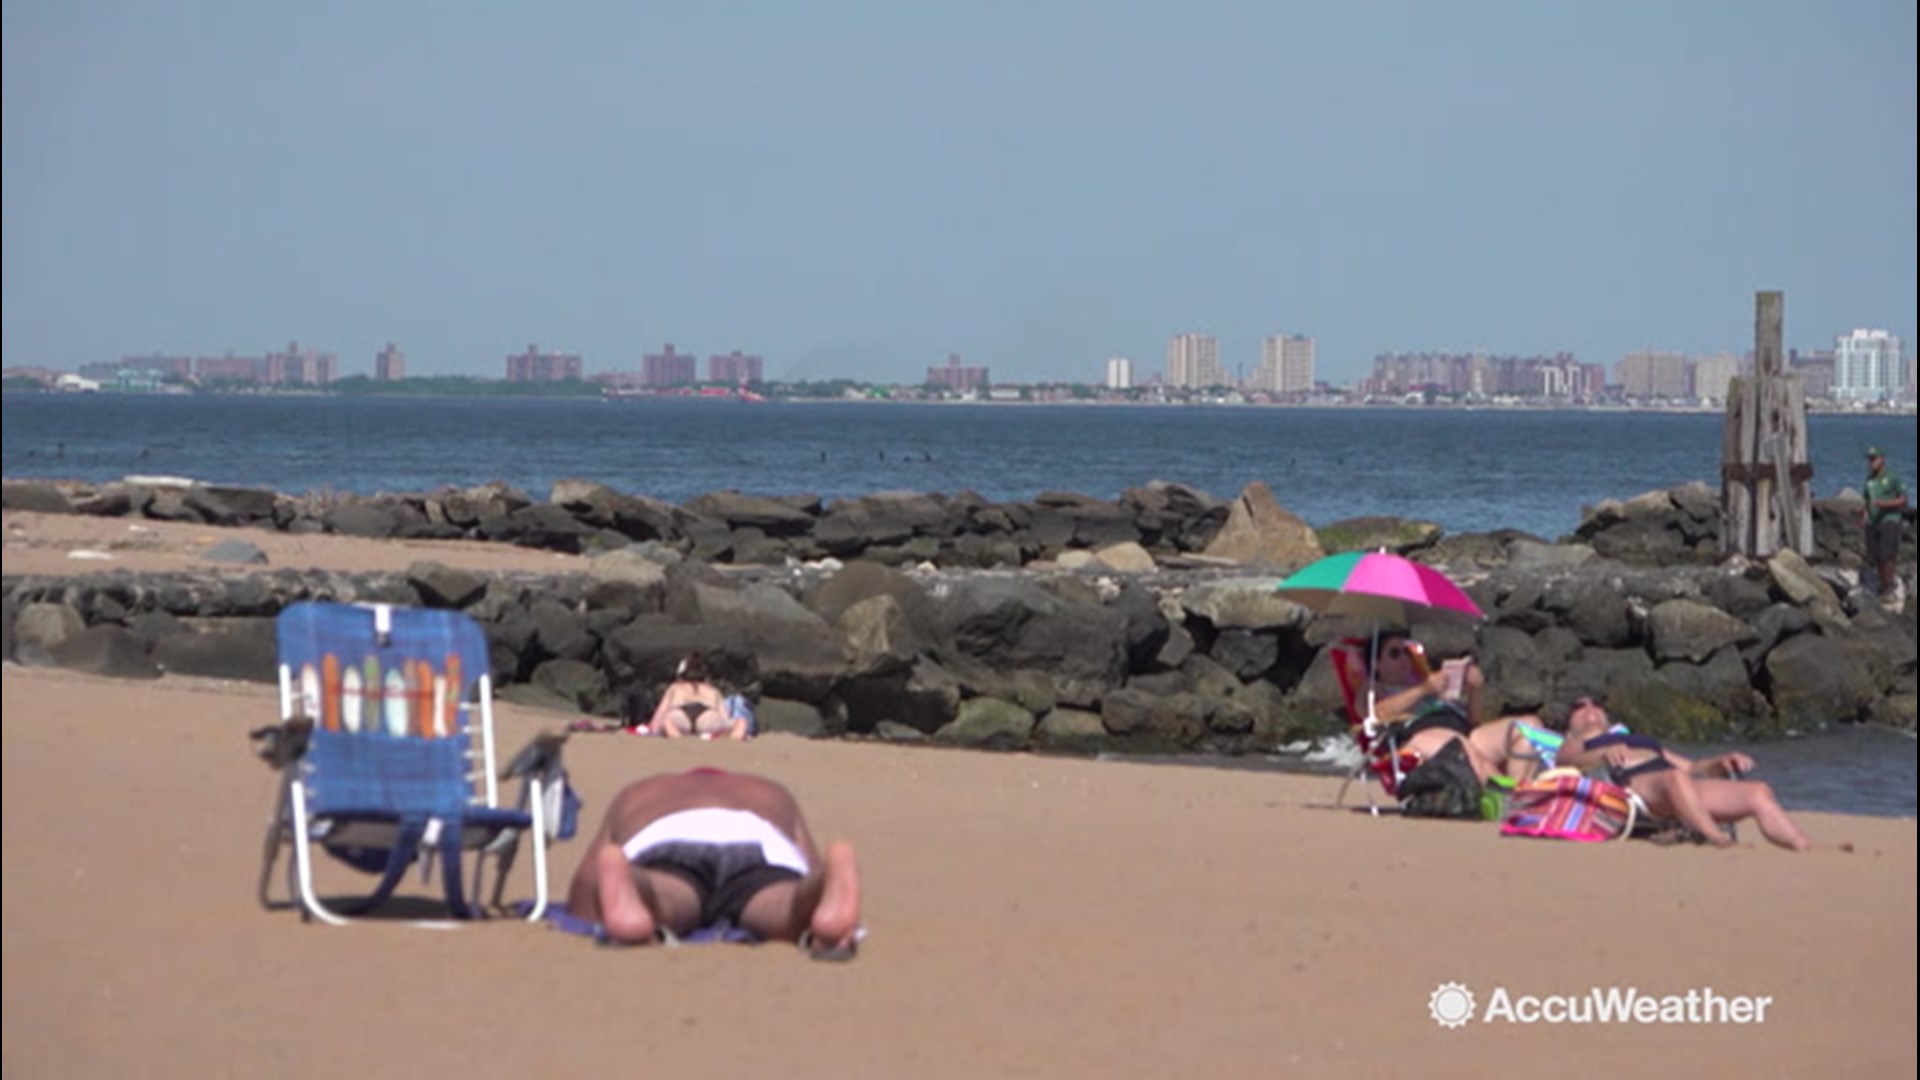 Oppressive heat is gripping the county. Our Kena Vernon gives us a look at the northeast where heat advisories and warnings were in effect all weekend, and shows us how it's affecting residents in the New York City area.